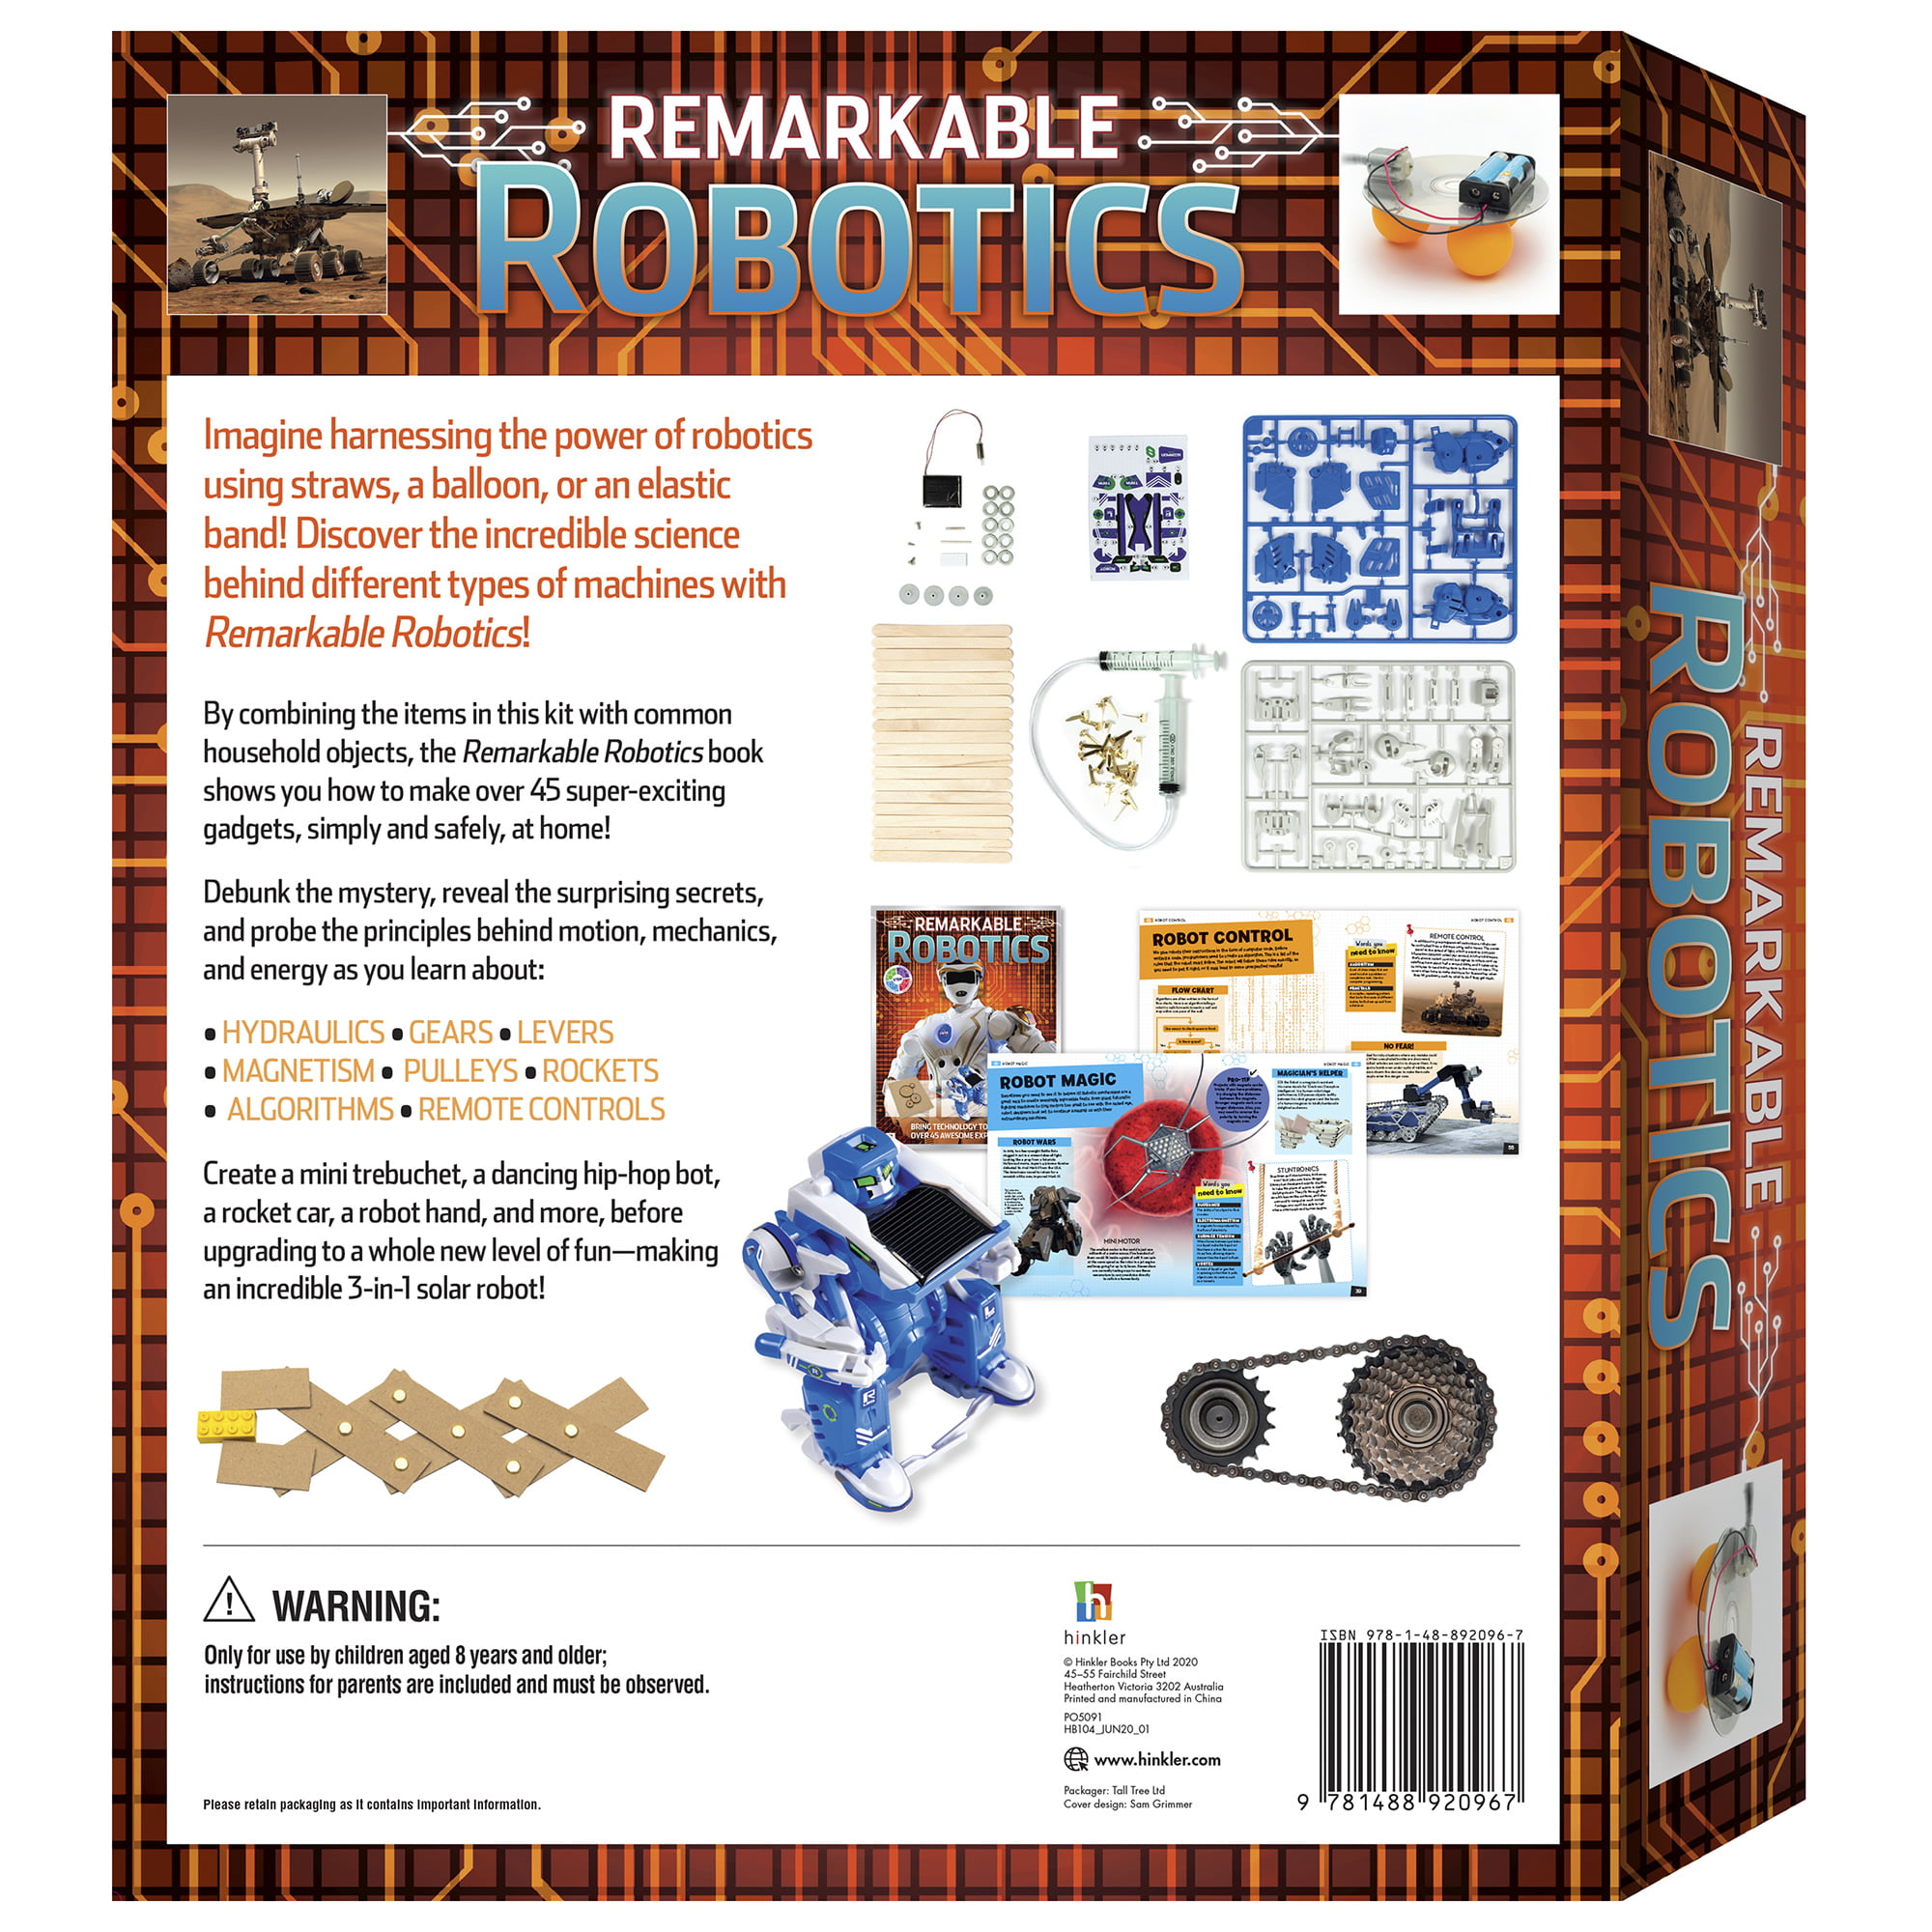 Curious Universe Kids: Making Machines - Book & Science Experiments Kit